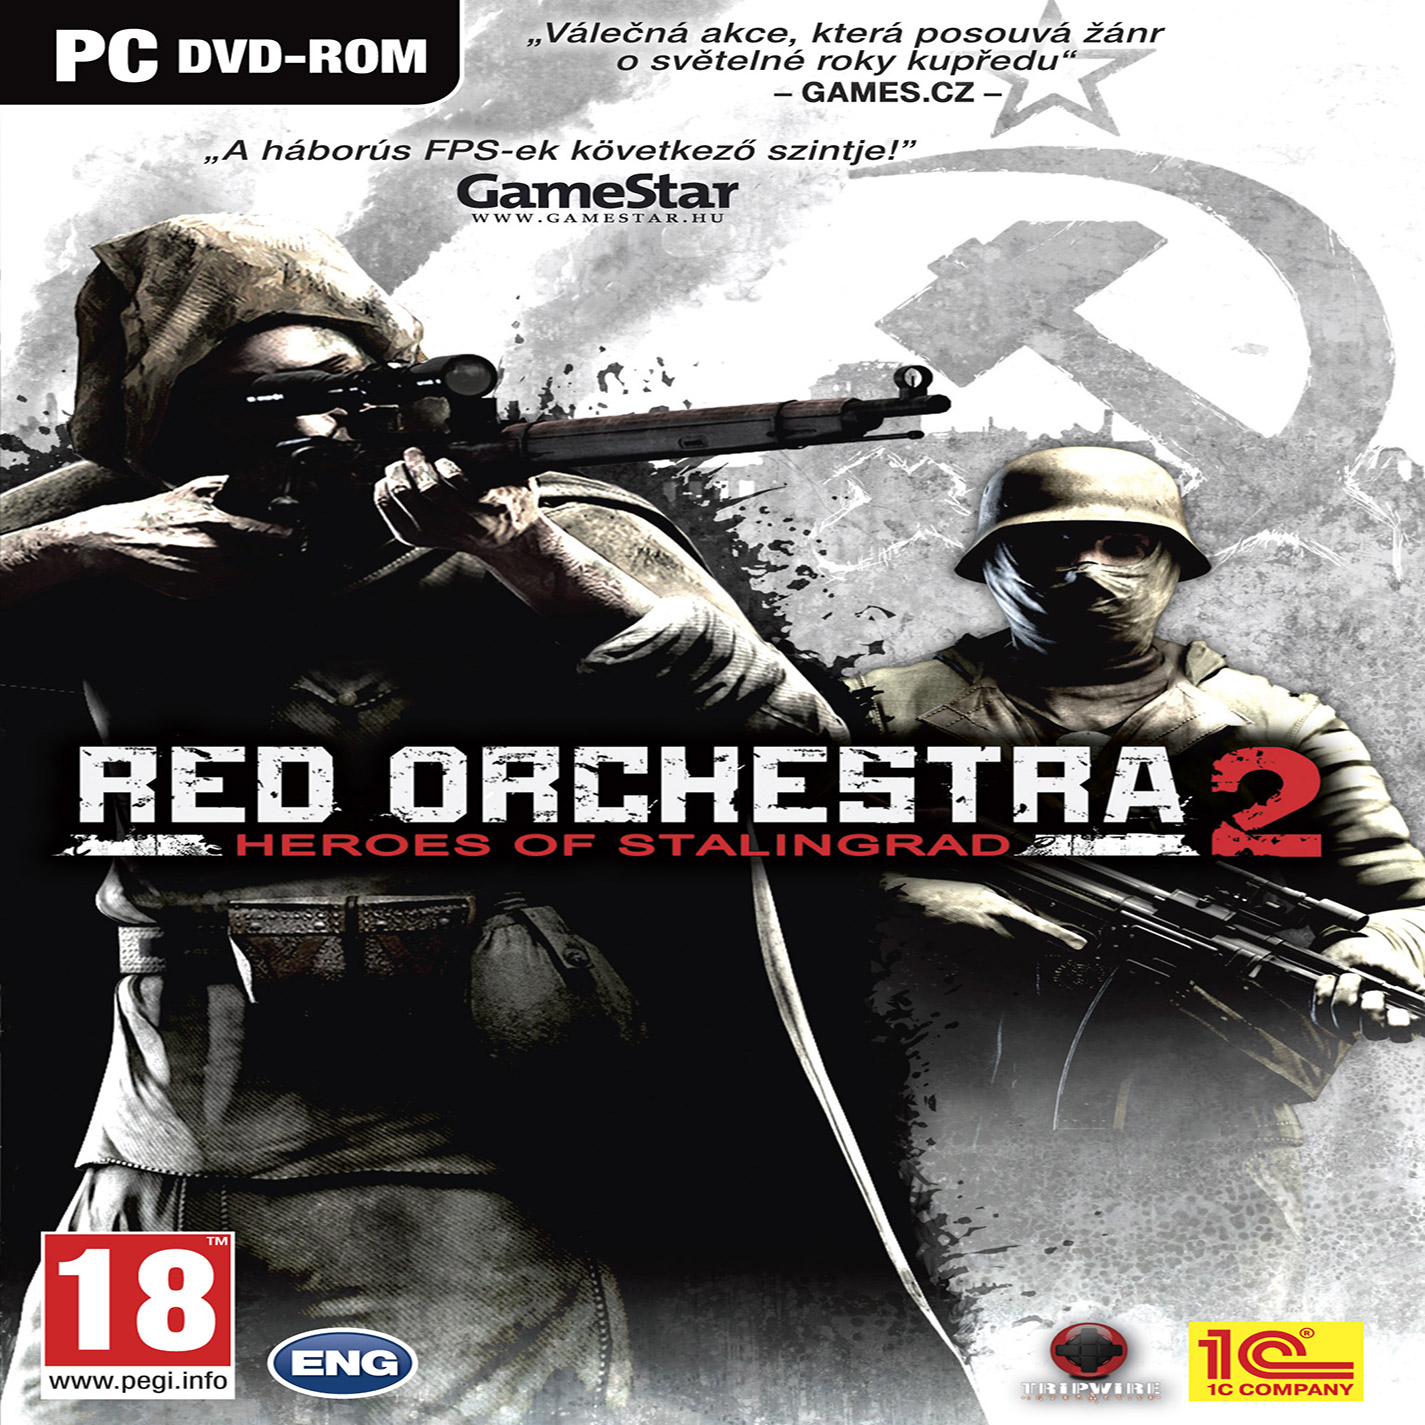 Red Orchestra 2: Heroes of Stalingrad - pedn CD obal